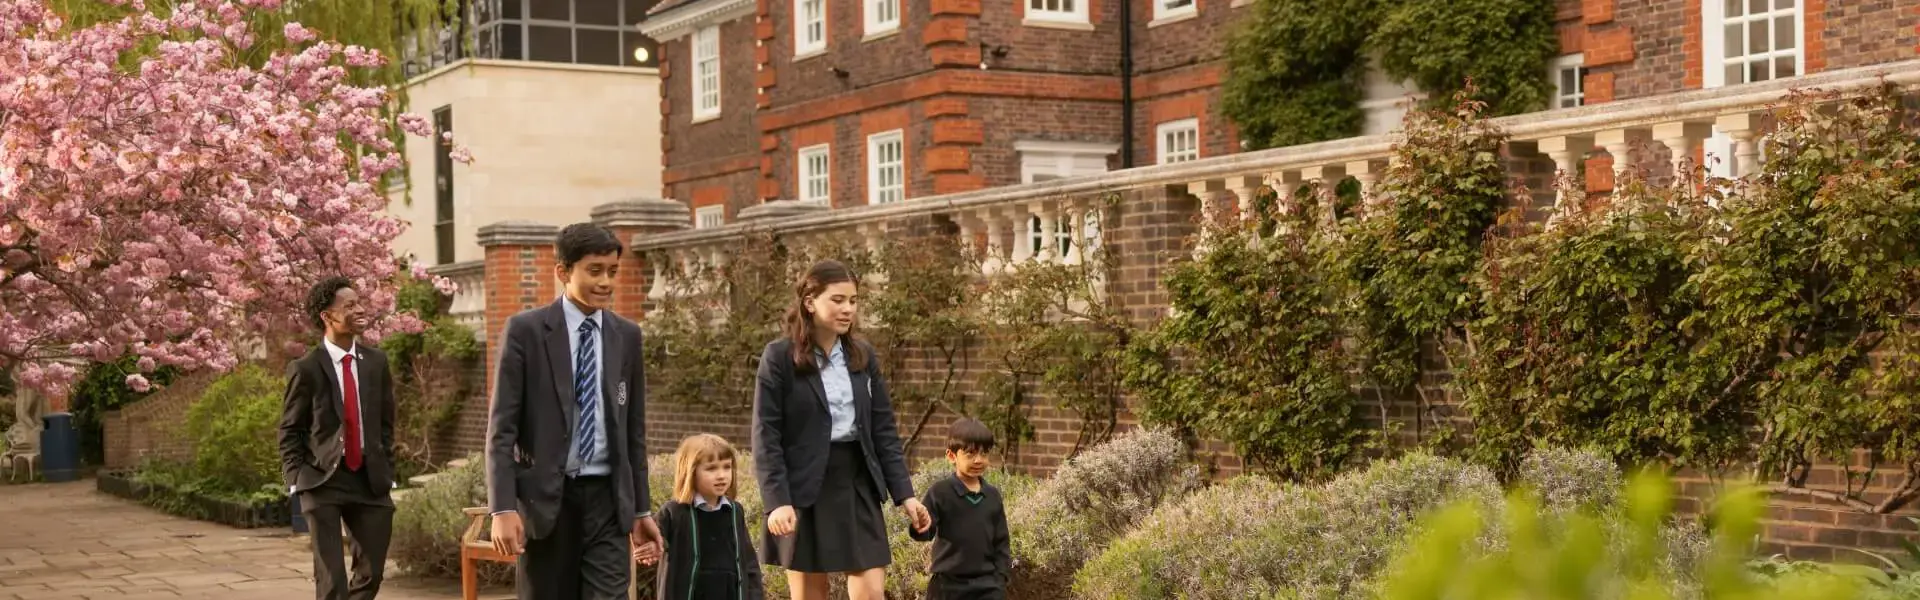 Senior and prep pupils walking together at the campus of  Ibstock Place School, a private school near Richmond.